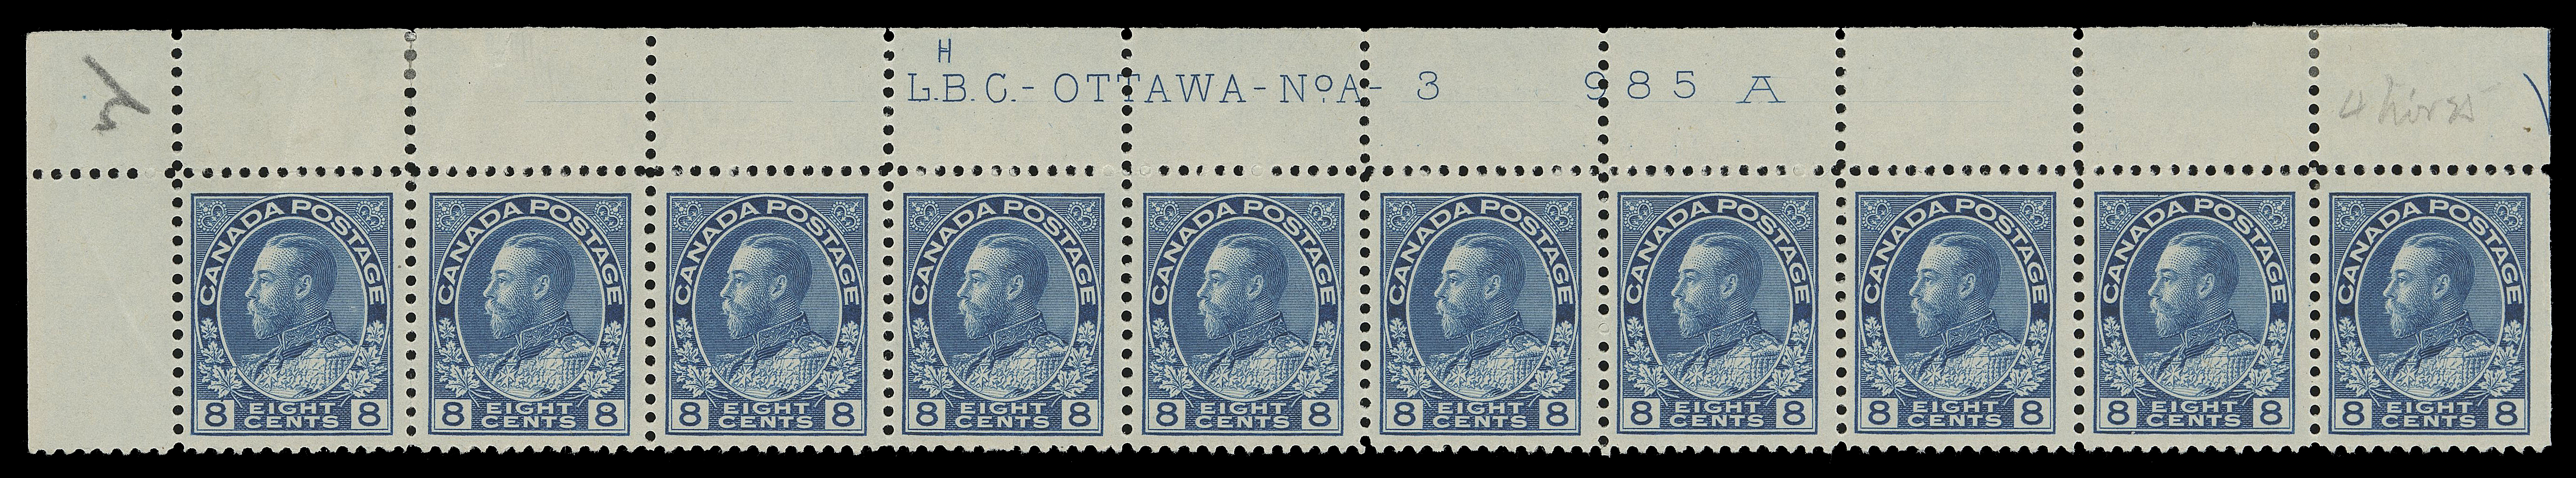 ADMIRAL STAMPS  115,Upper left Plate 3 strip of ten with engraver